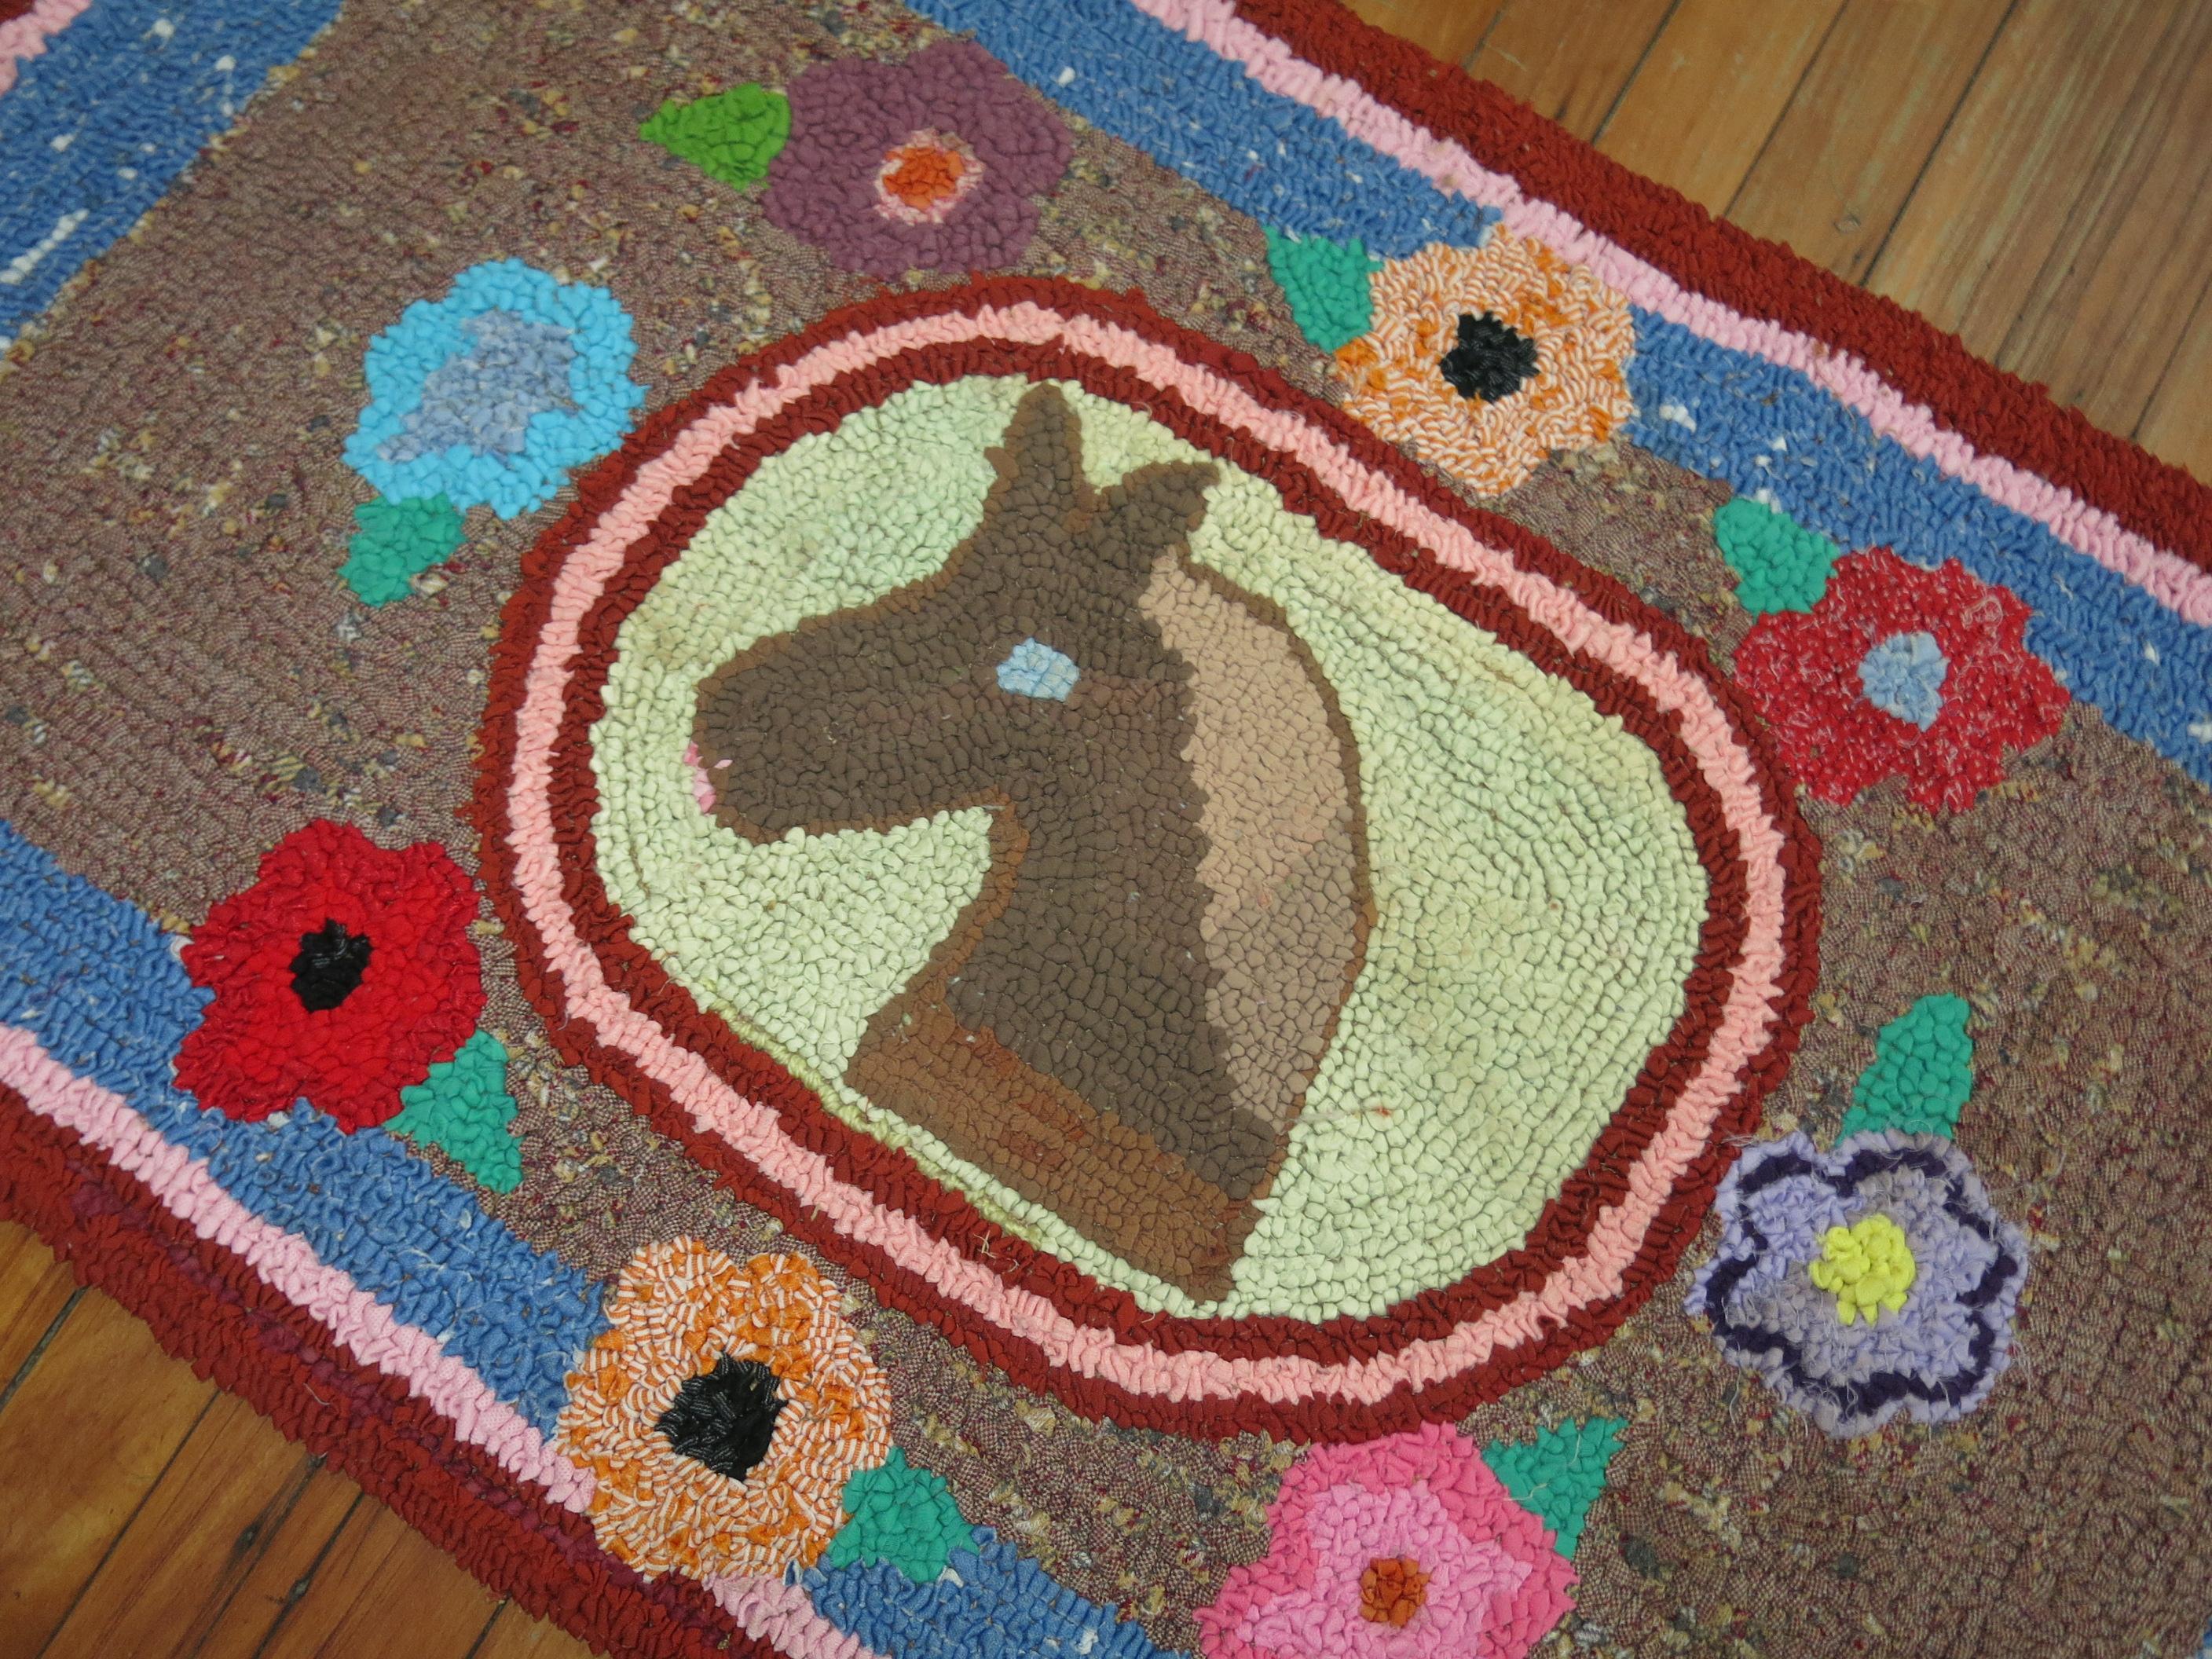 Hand-Woven American Hooked Pictorial Horse Rug